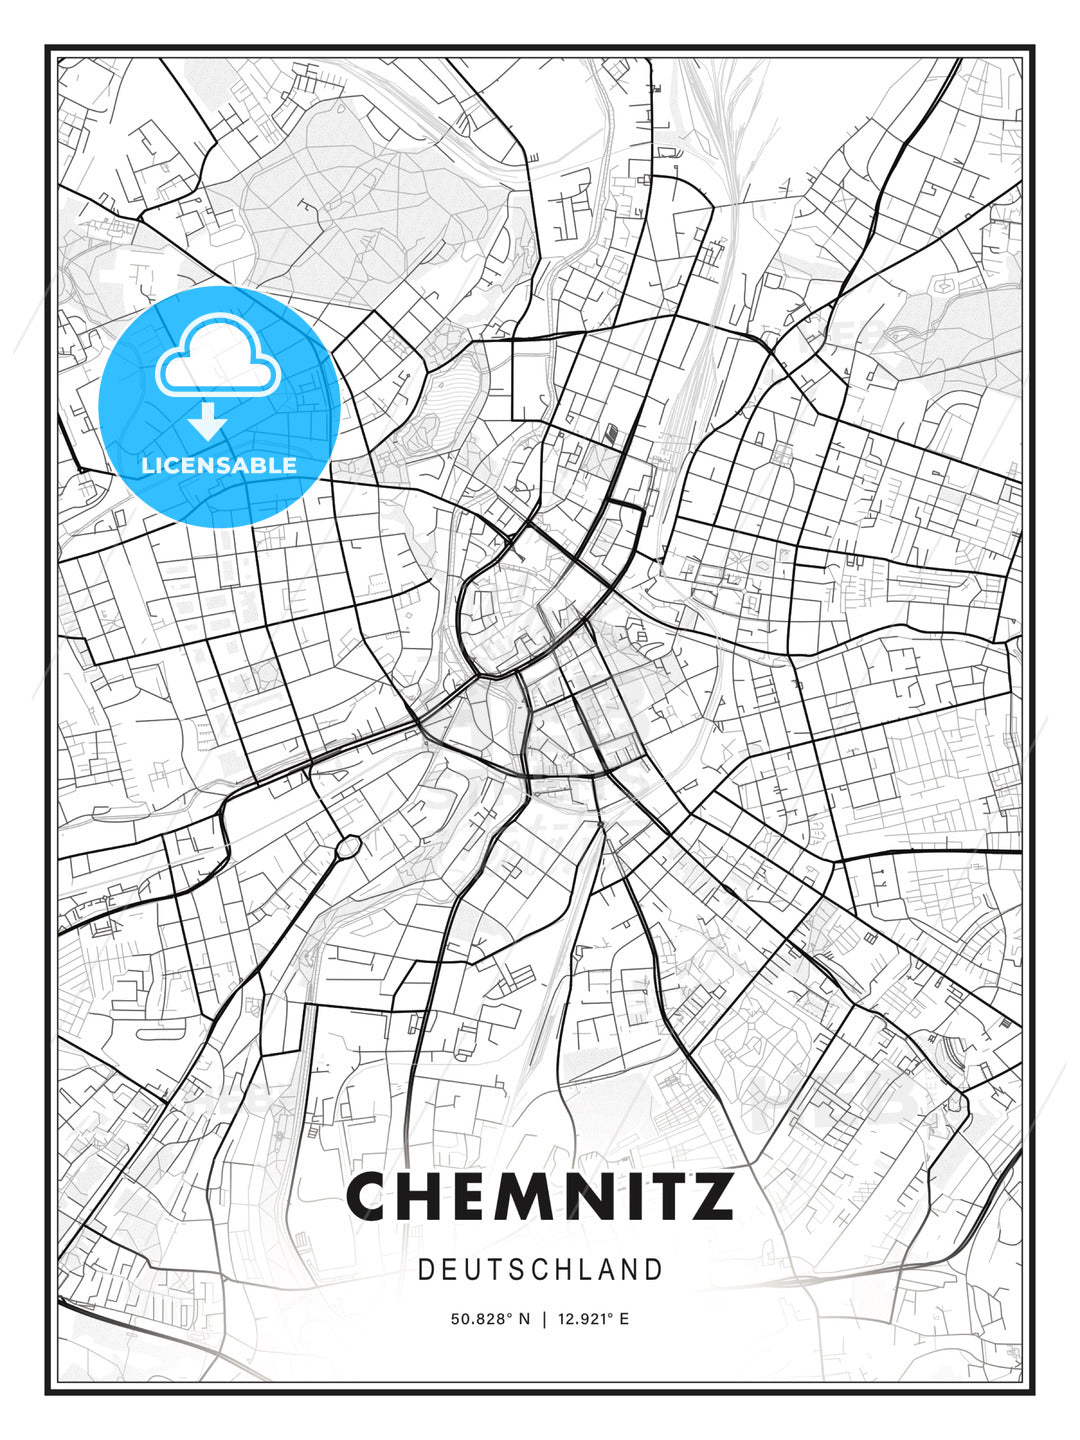 Chemnitz, Germany, Modern Print Template in Various Formats - HEBSTREITS Sketches